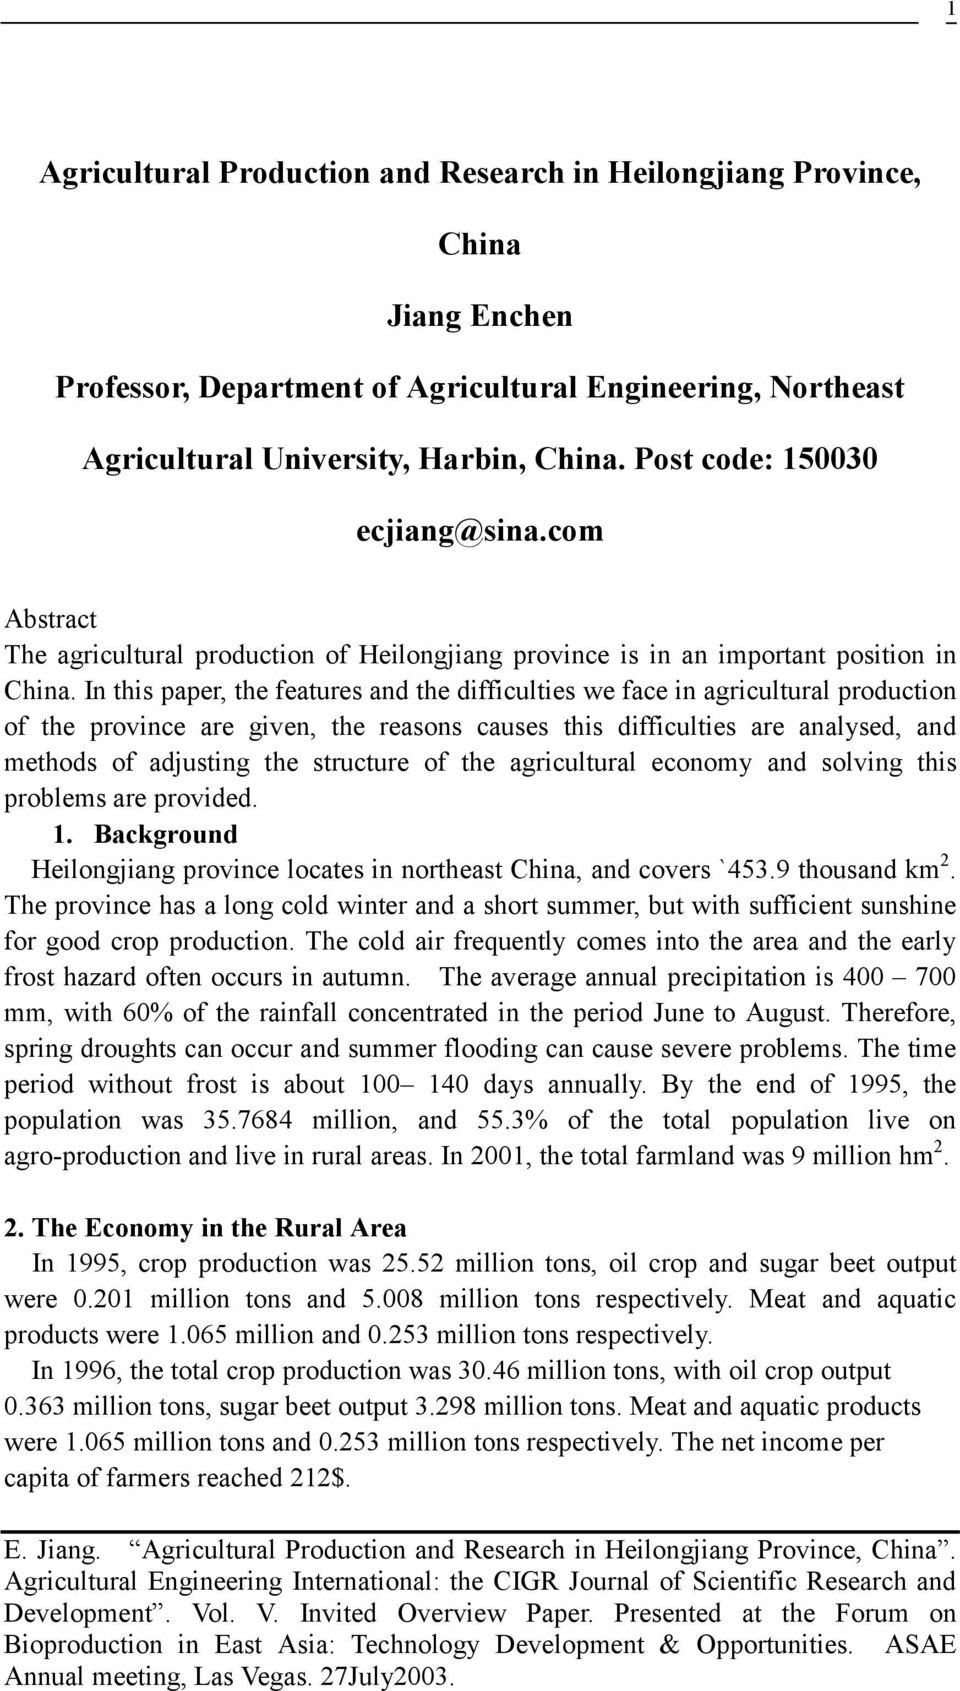 In this paper, the features and the difficulties we face in agricultural production of the province are given, the reasons causes this difficulties are analysed, and methods of adjusting the